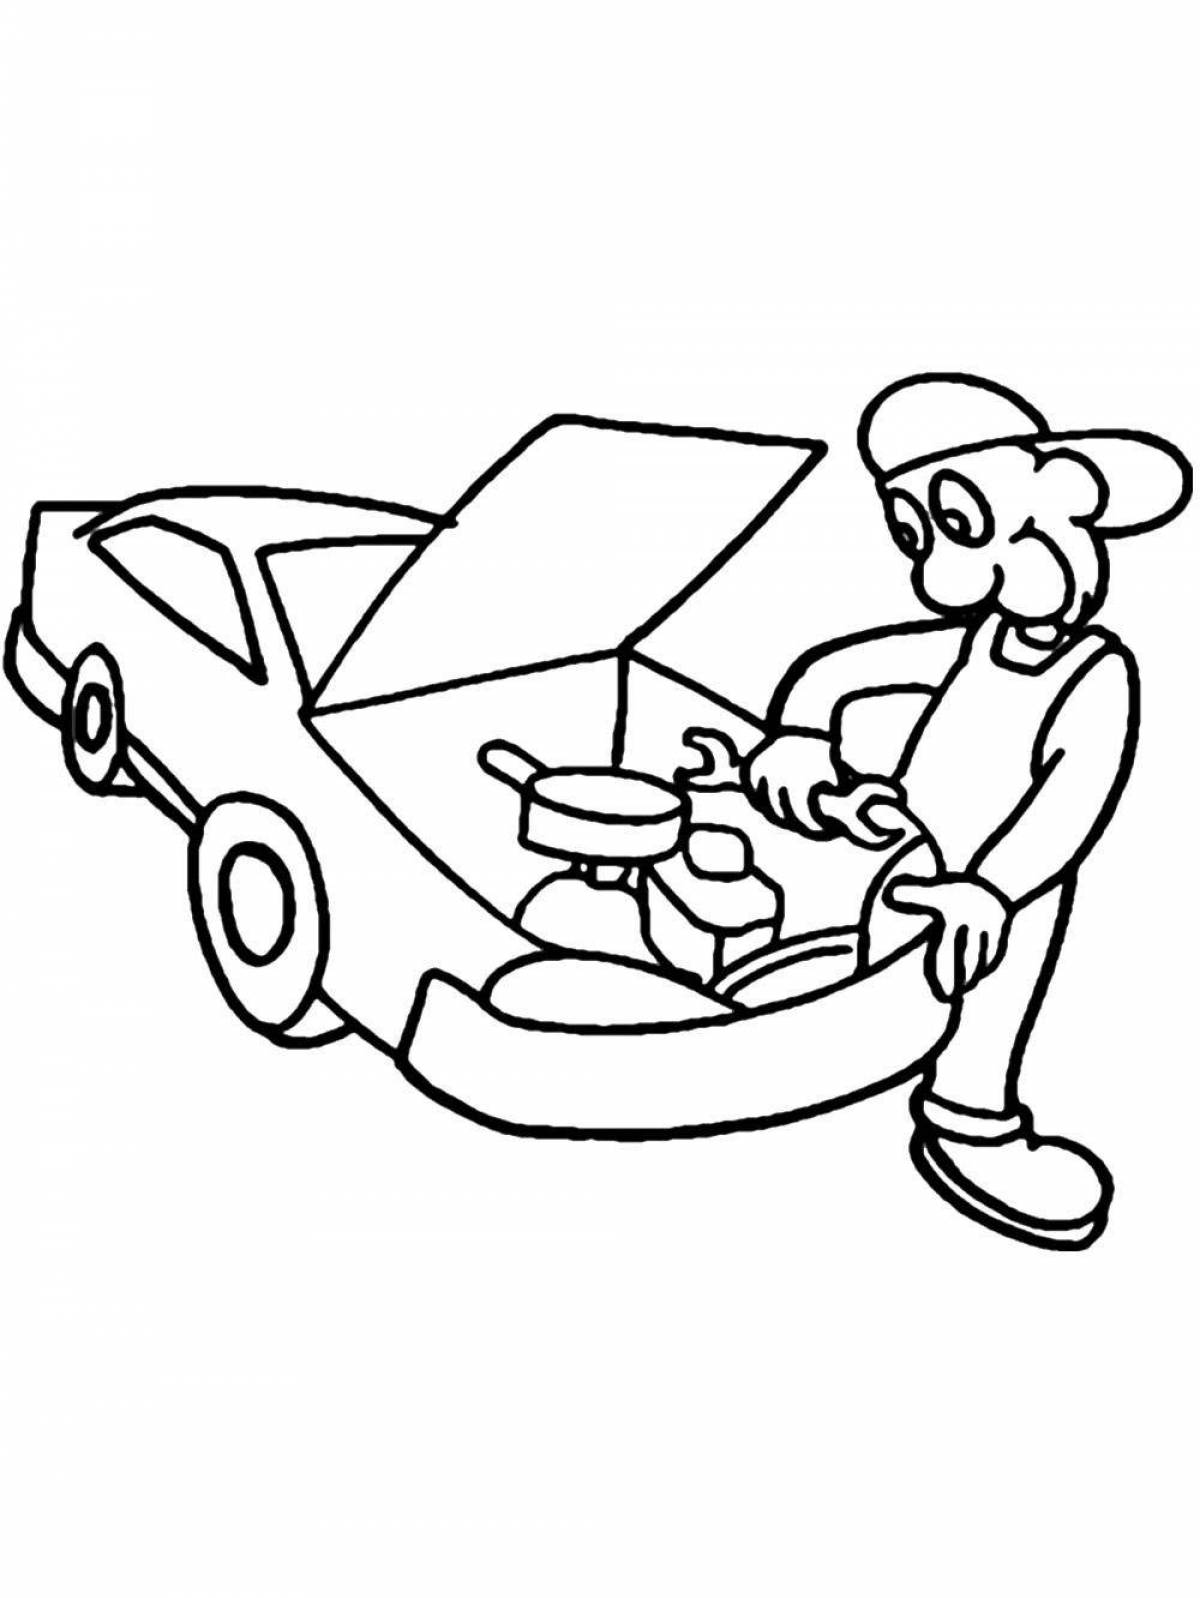 Coloring book is a pleasant profession of an auto mechanic